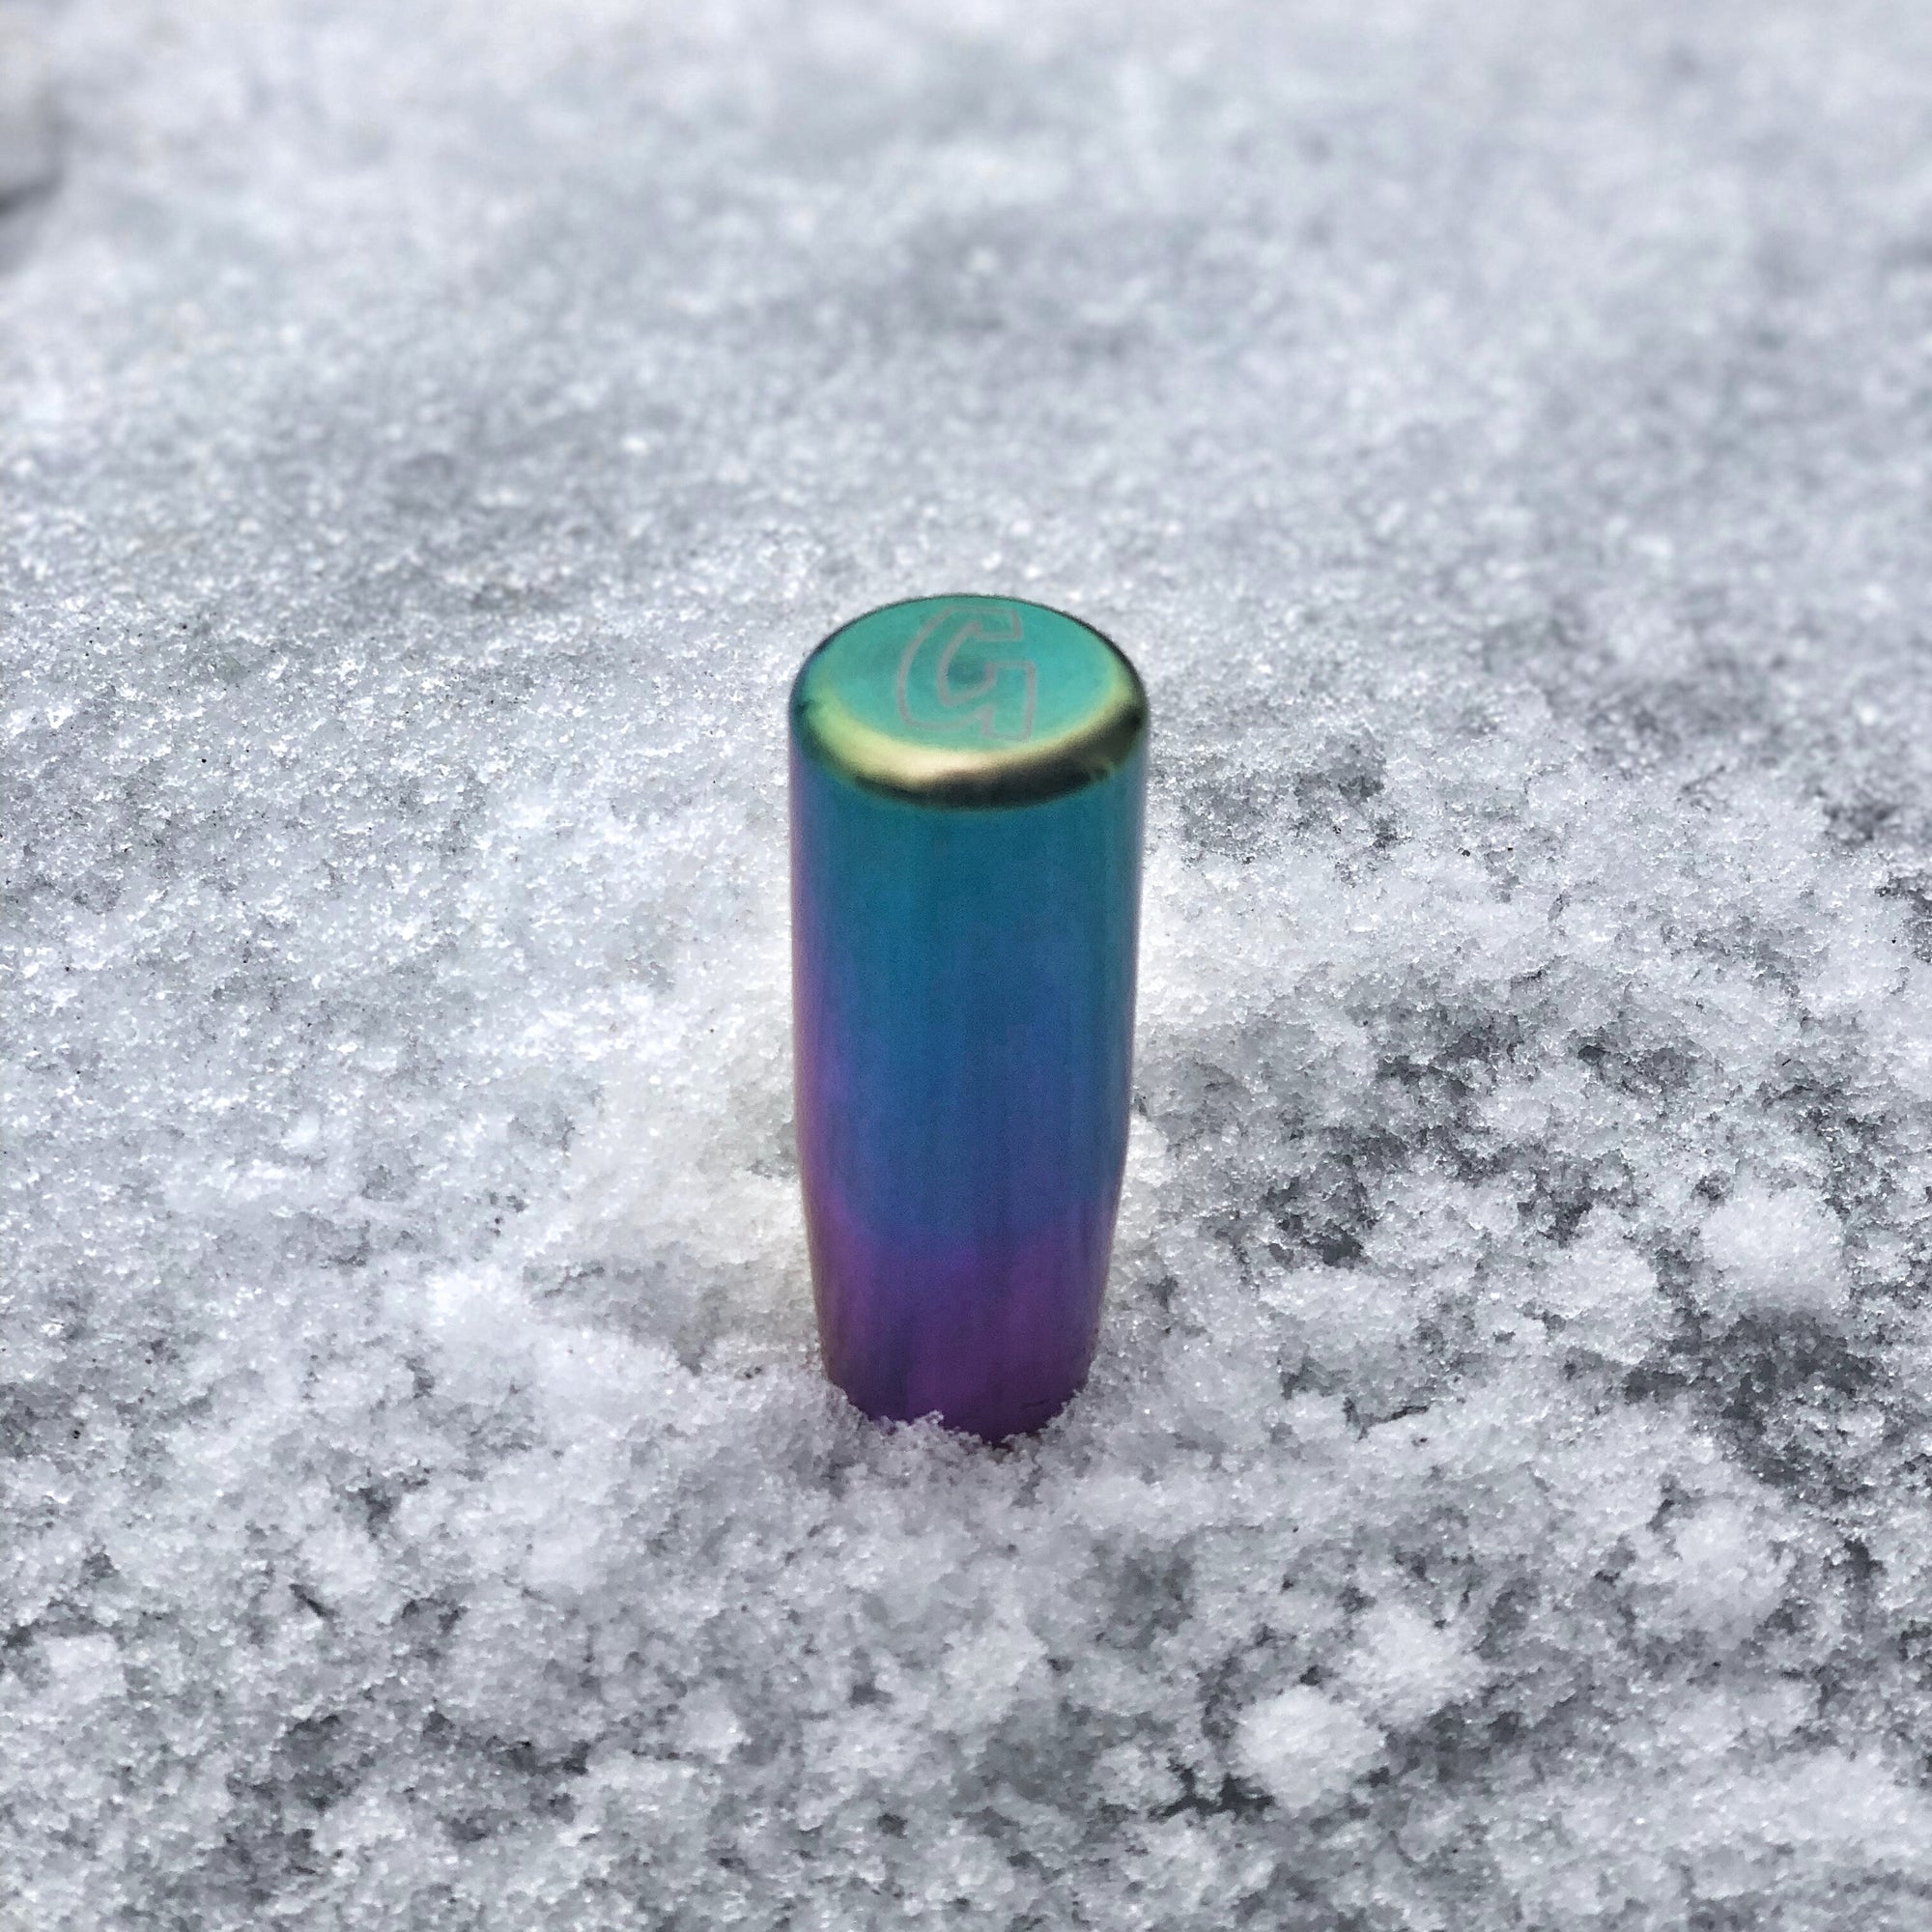 neochrome weighted shift knob